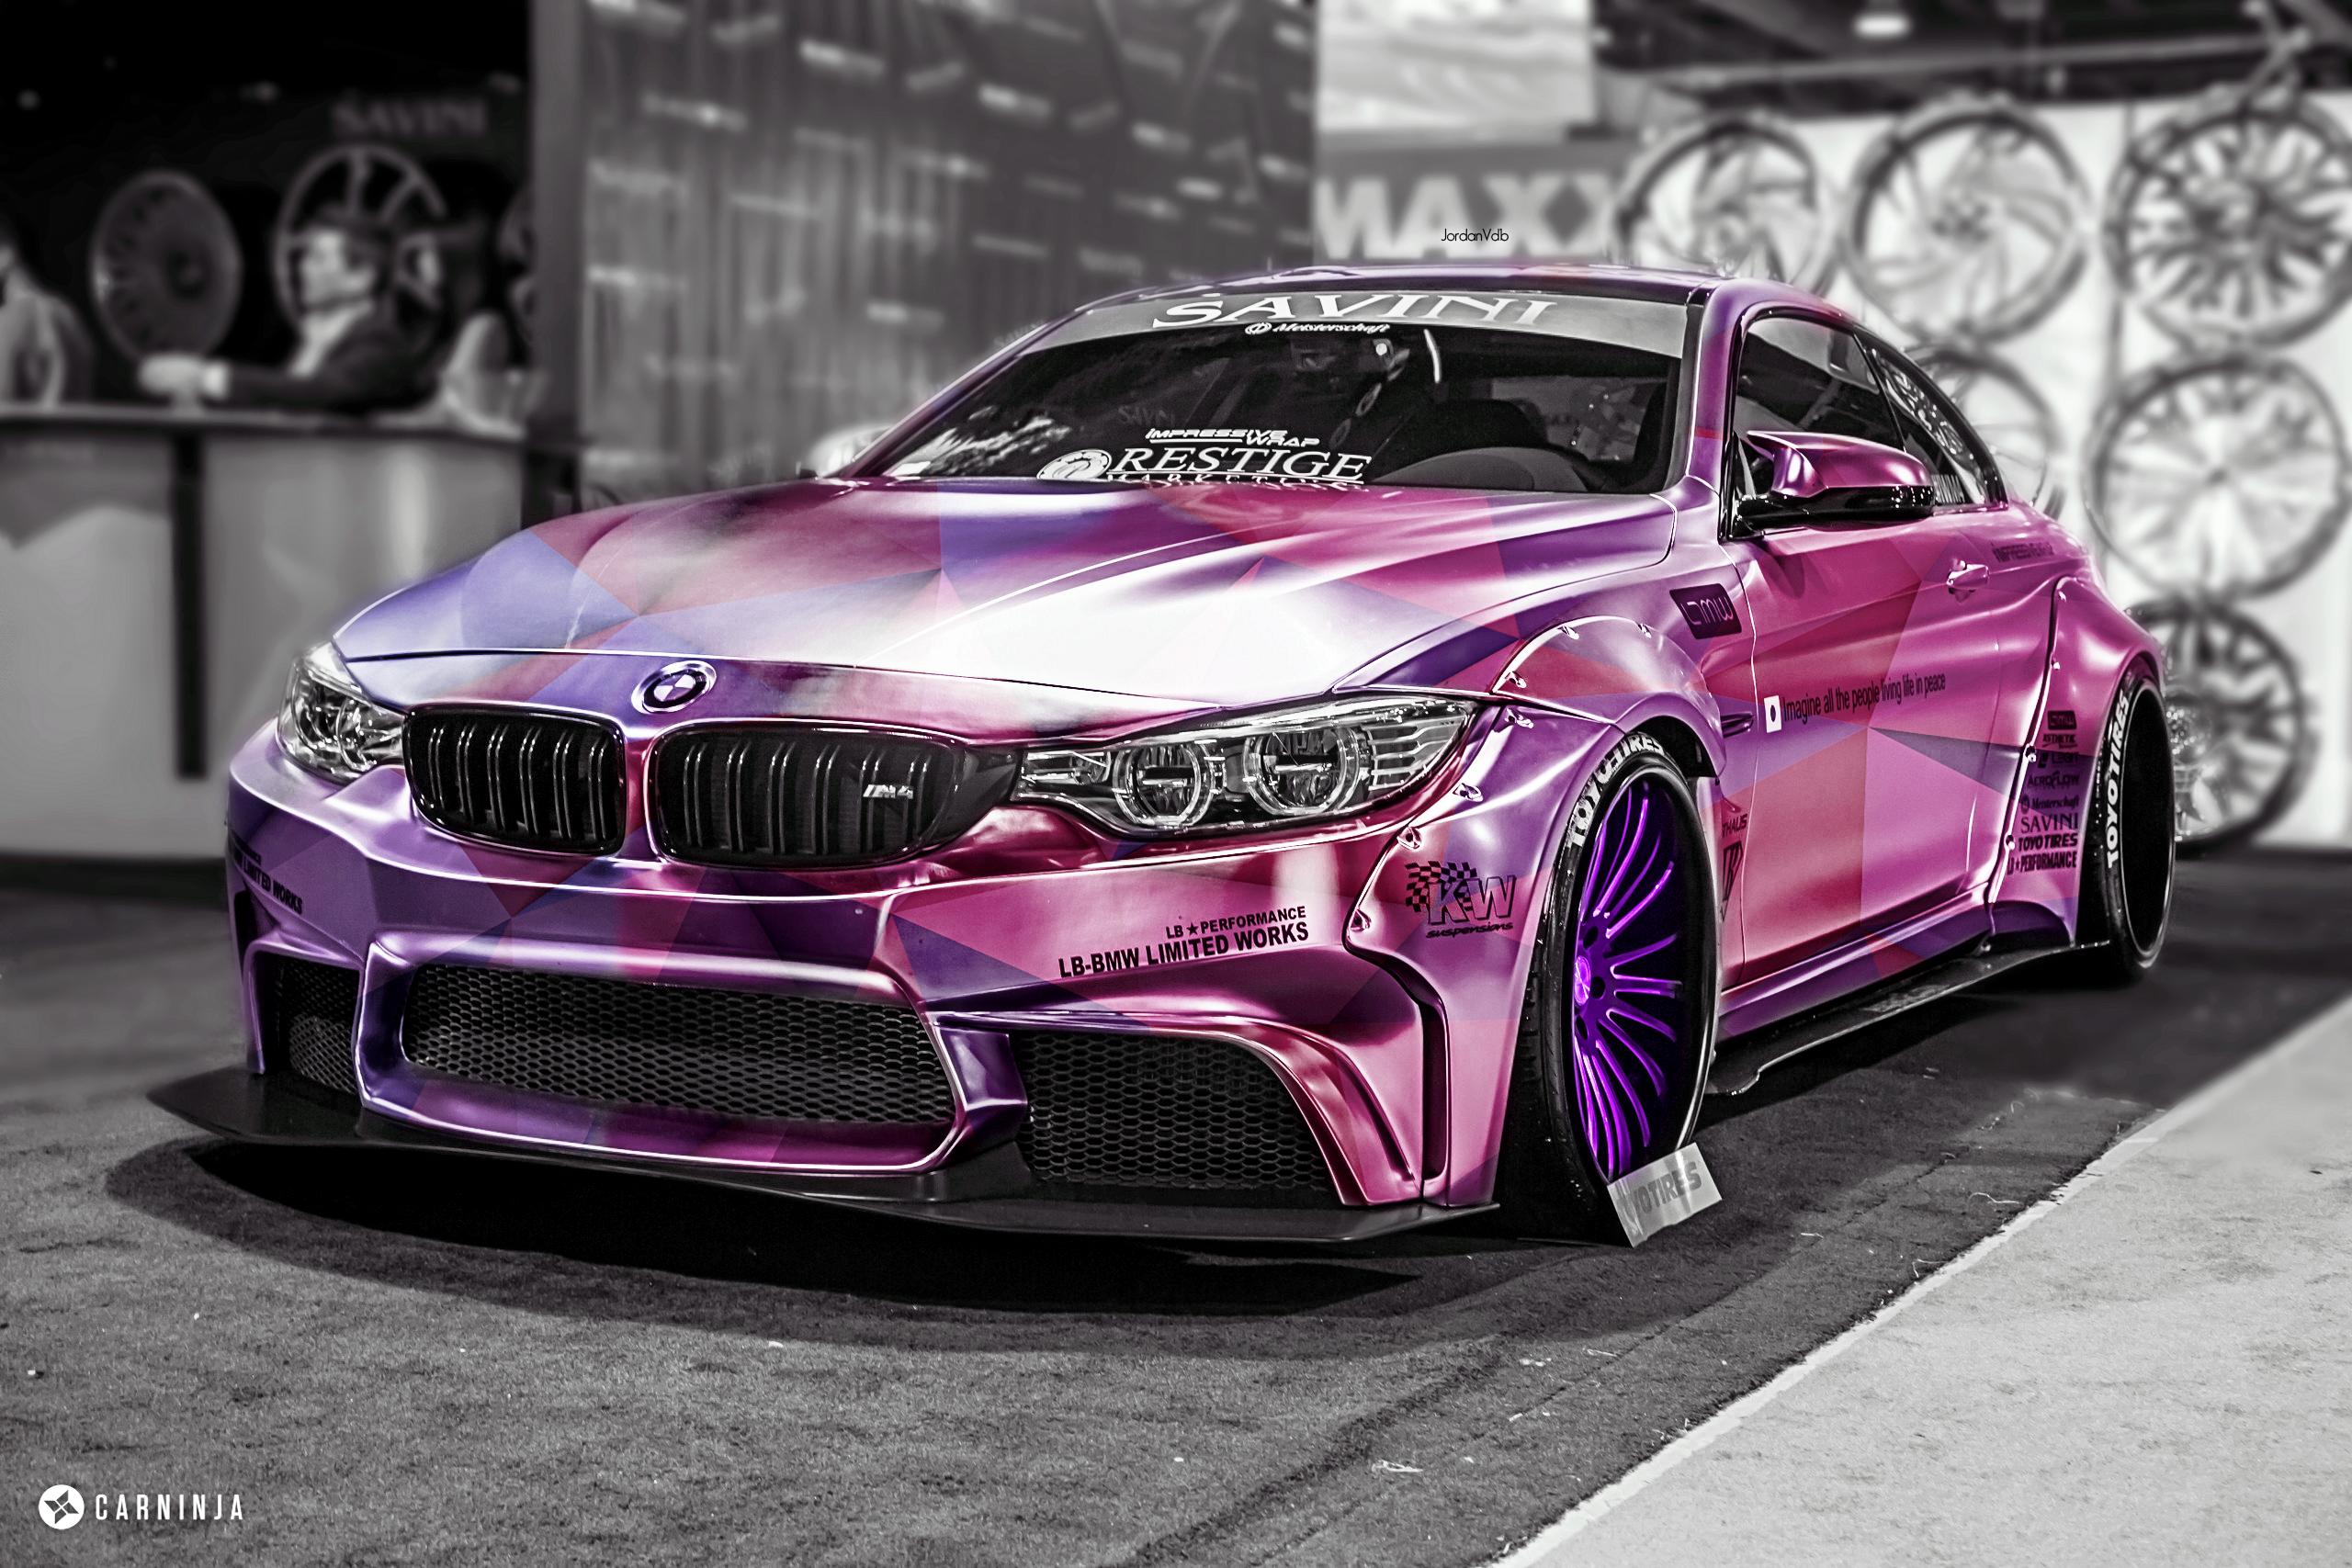 General 2560x1707 BMW photo manipulation car vehicle BMW M4 pink selective coloring BMW F80/F82/F83 colored wheels bodykit